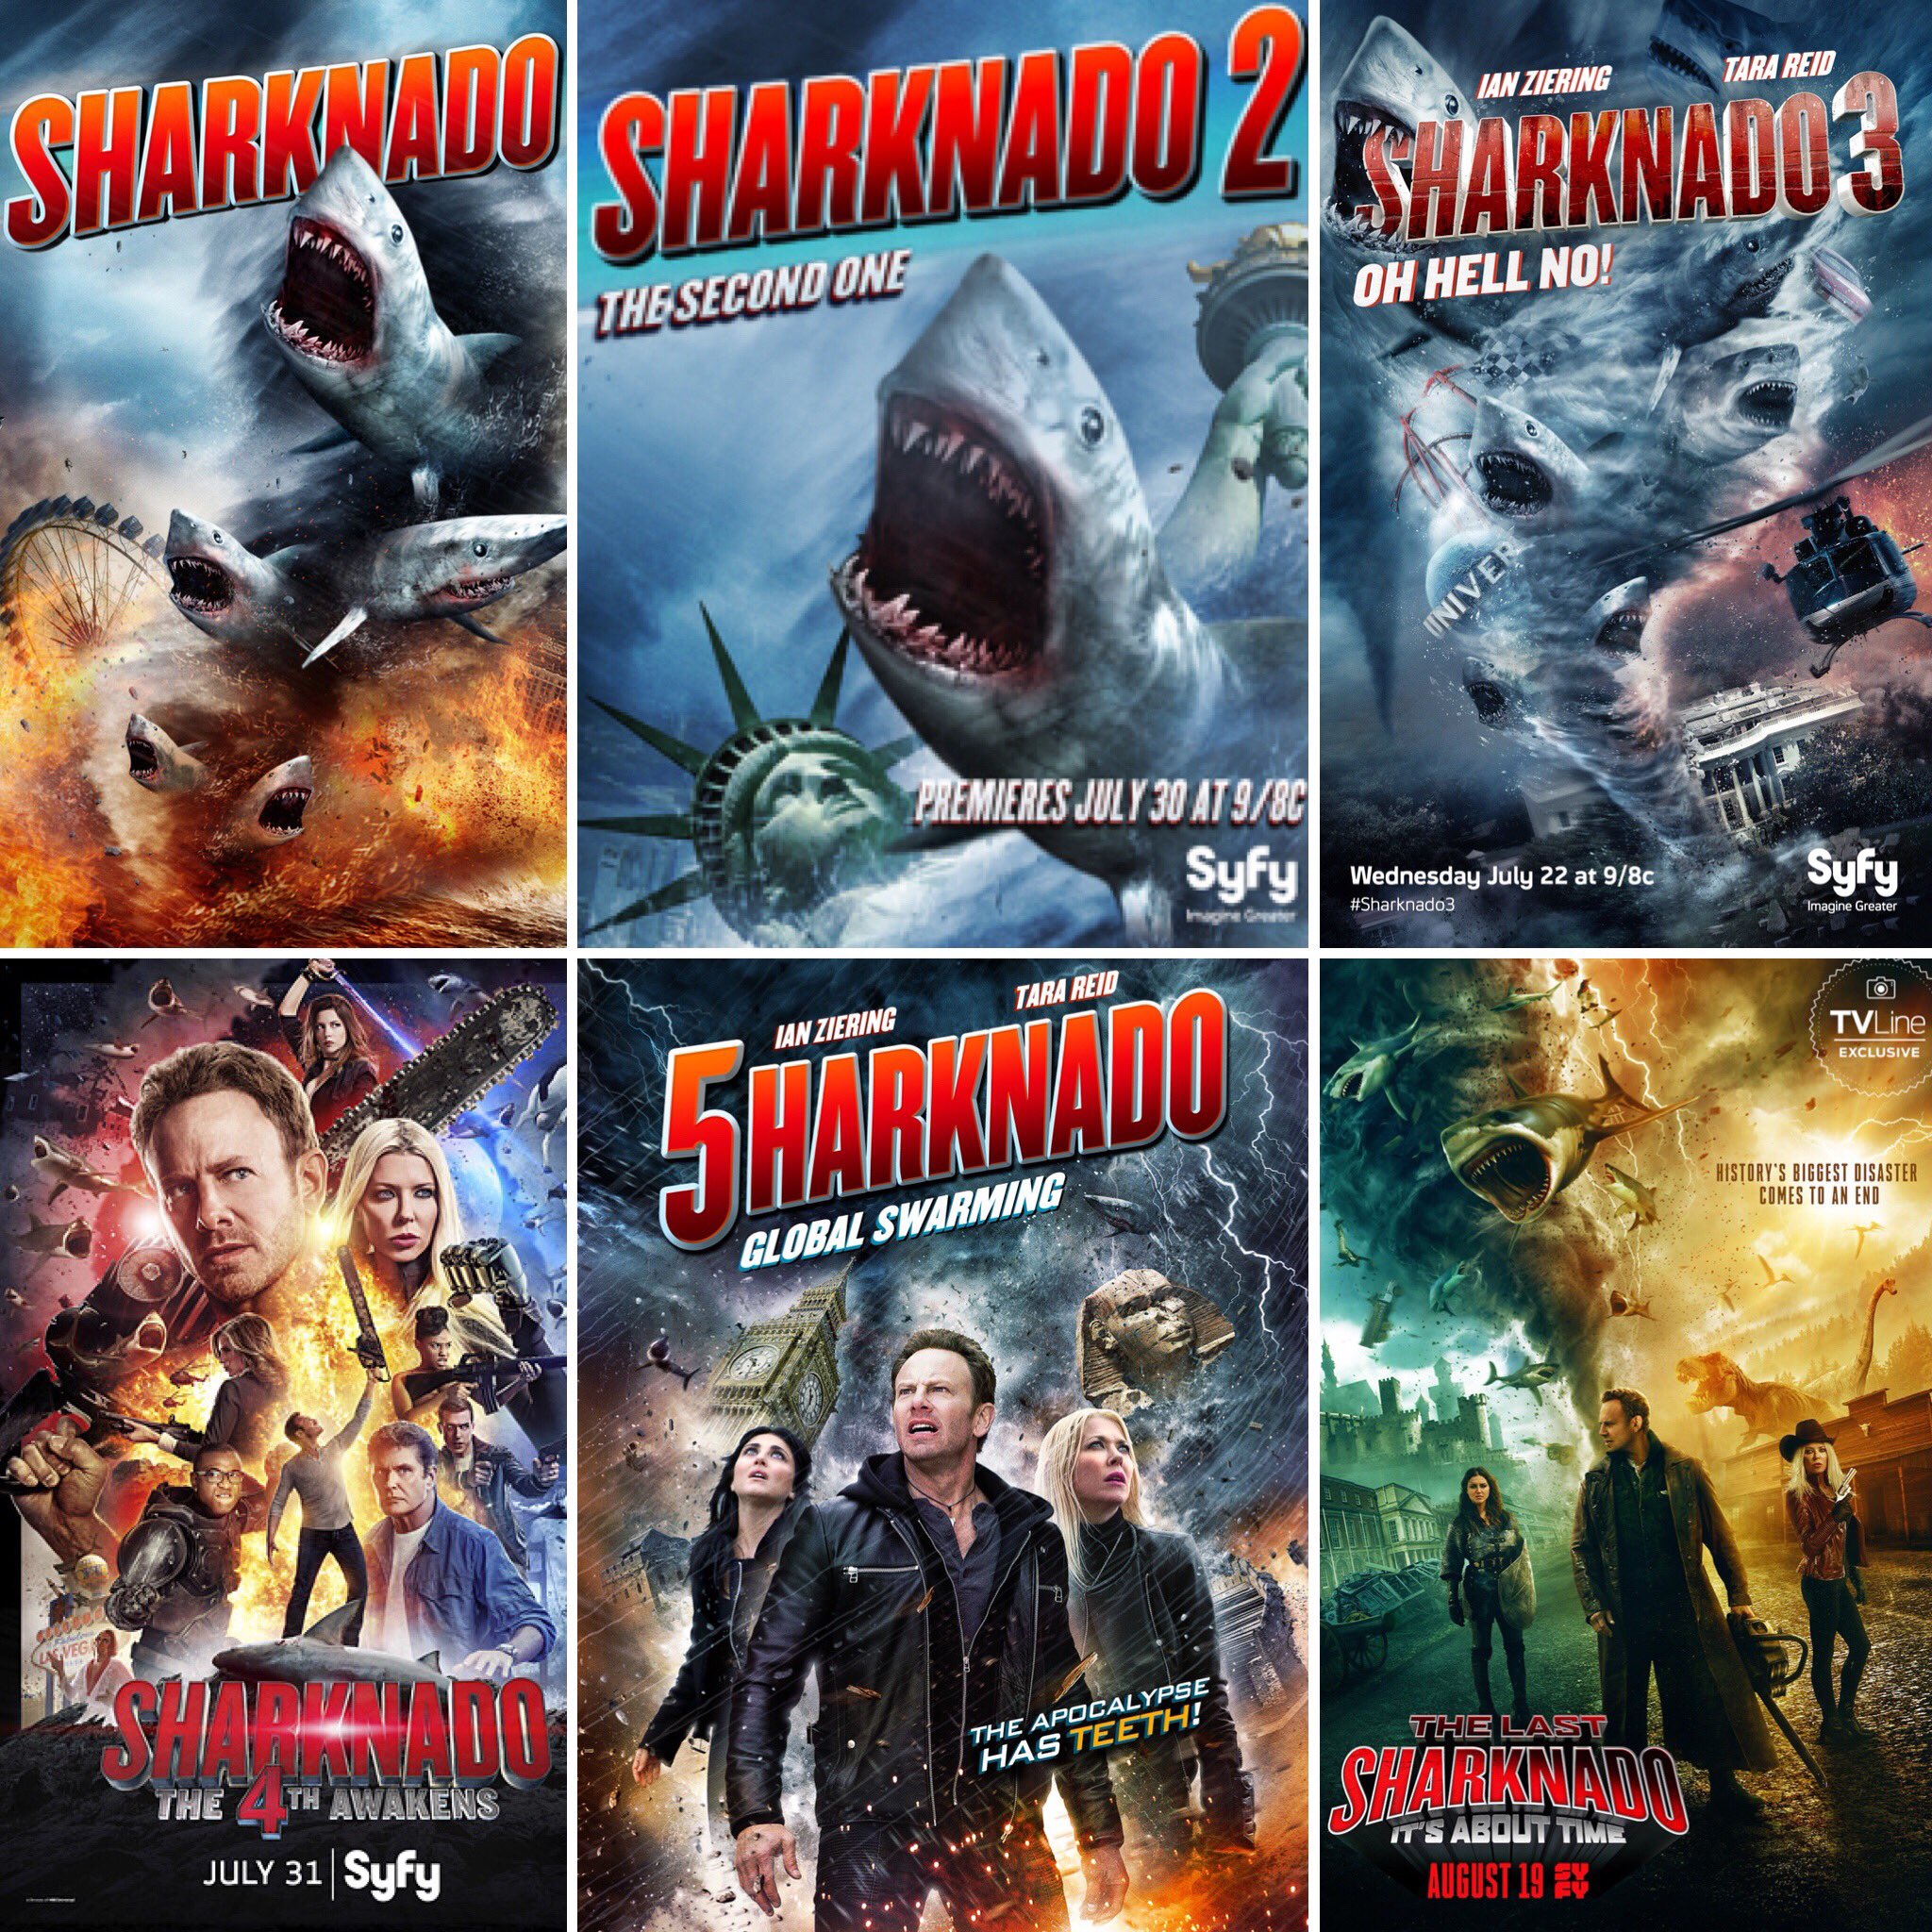 Tony the Movie Guy on Twitter: "@SharknadoSYFY The Last Sharknado: It's About Time is coming out August 19th so it's time to do a MOVIE MARATHON of the series!!!